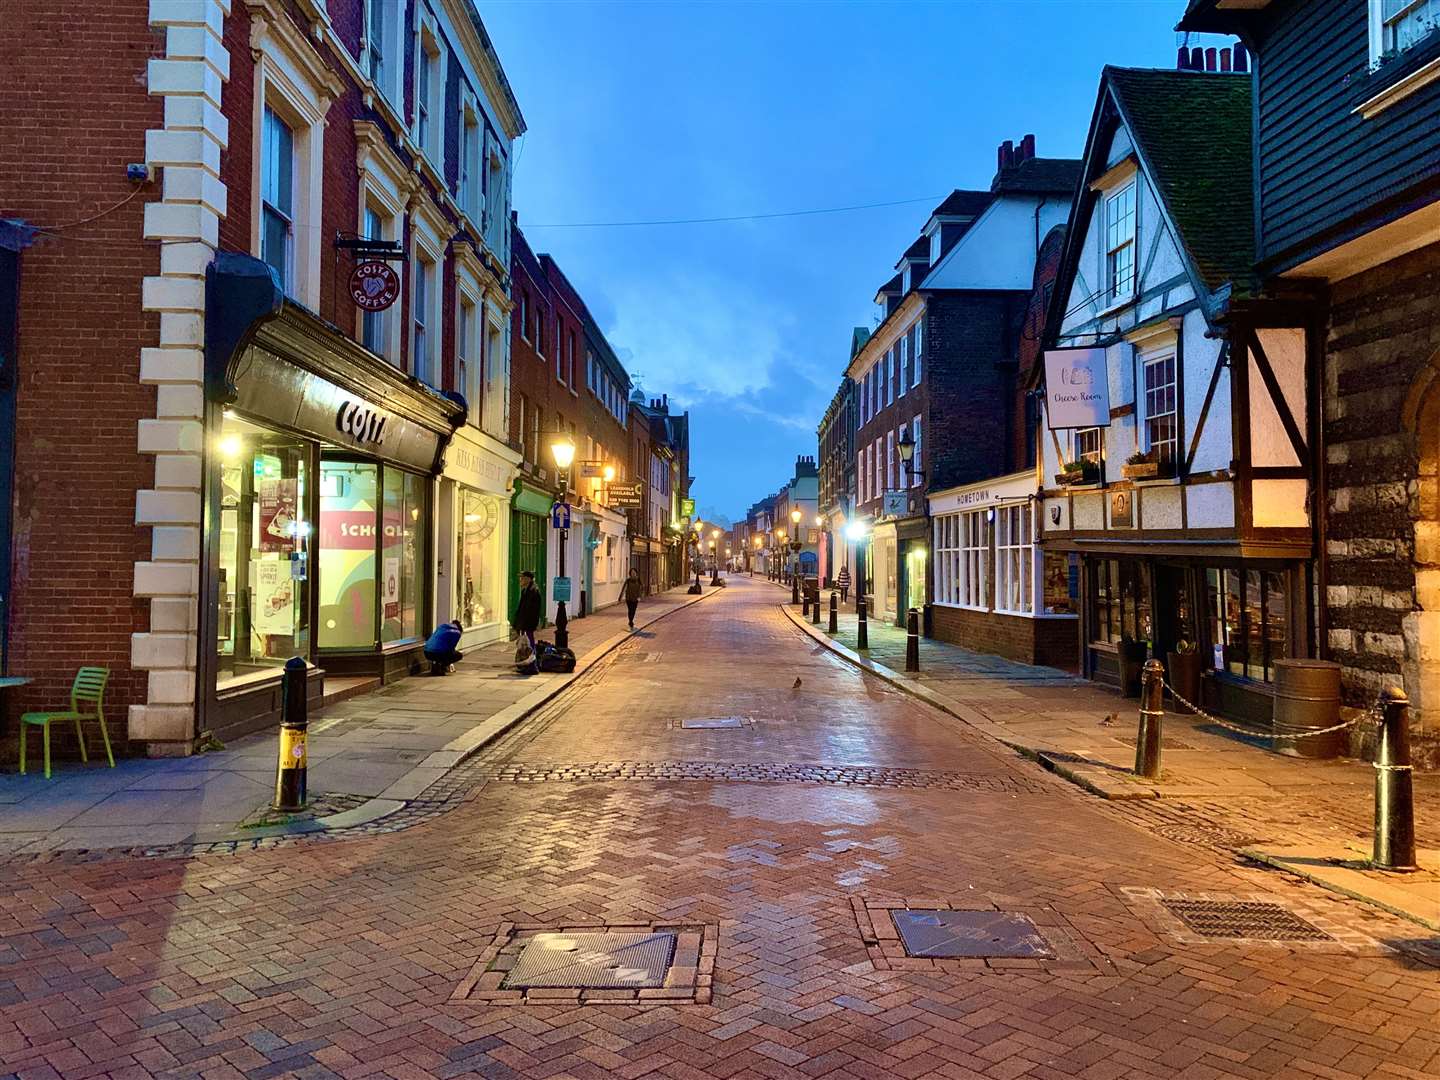 Some high streets in established tourist areas, such as here in Rochester, are likely to fare better than others. Picture: Alex Watson